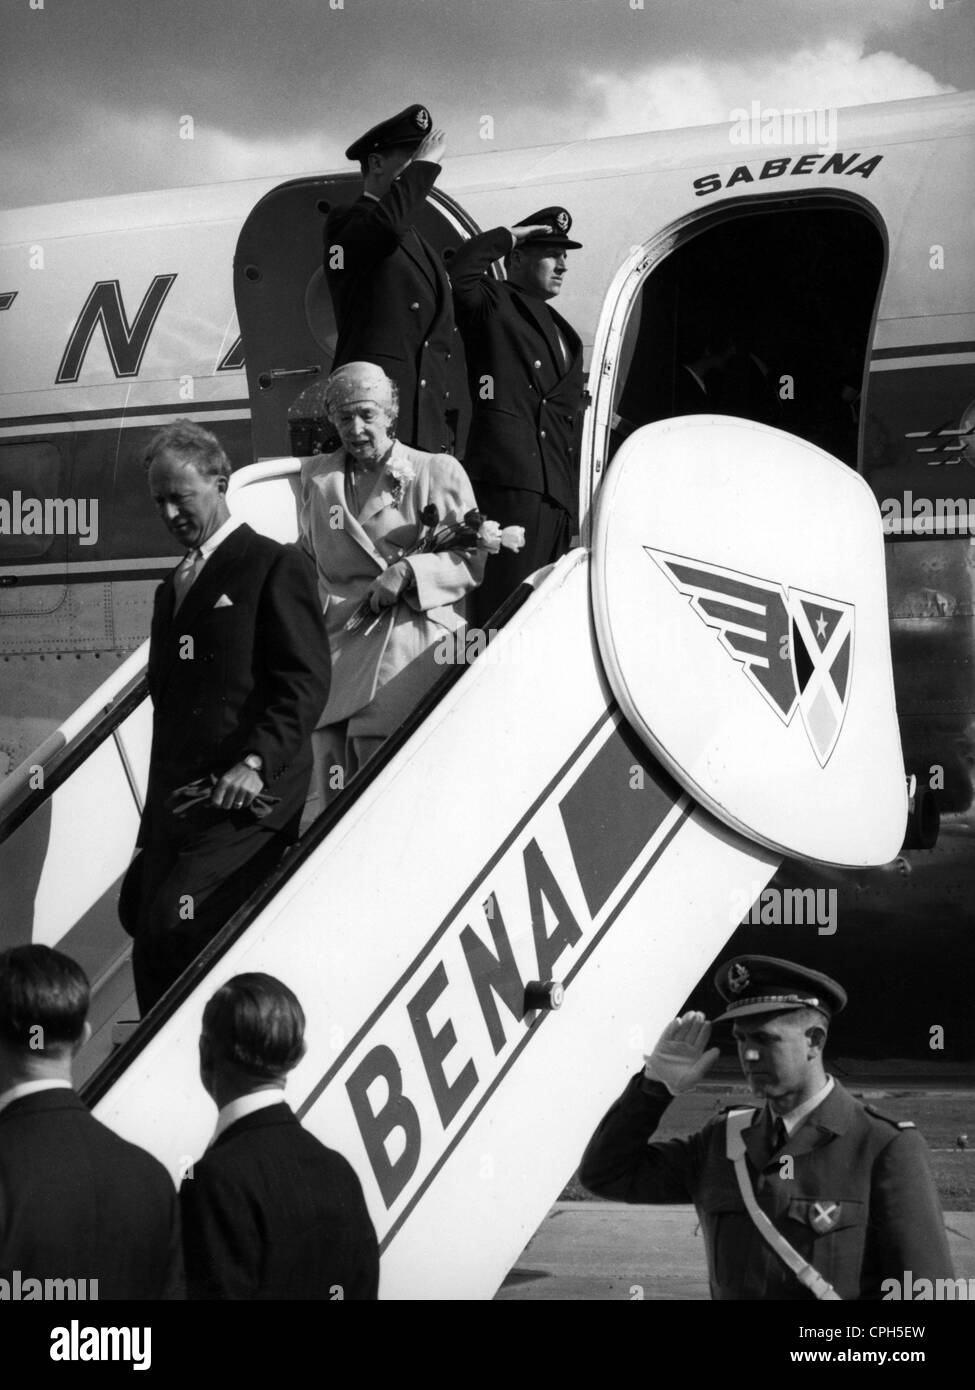 Leopold III, 3.11.1901 - 25.9.1983, King of the Belgians 23.2.1934 - 16.7.1951, with Queen Mother Elizabeth, leaving the Royal Airplane, departure of King Baudoin, 1950s, Stock Photo